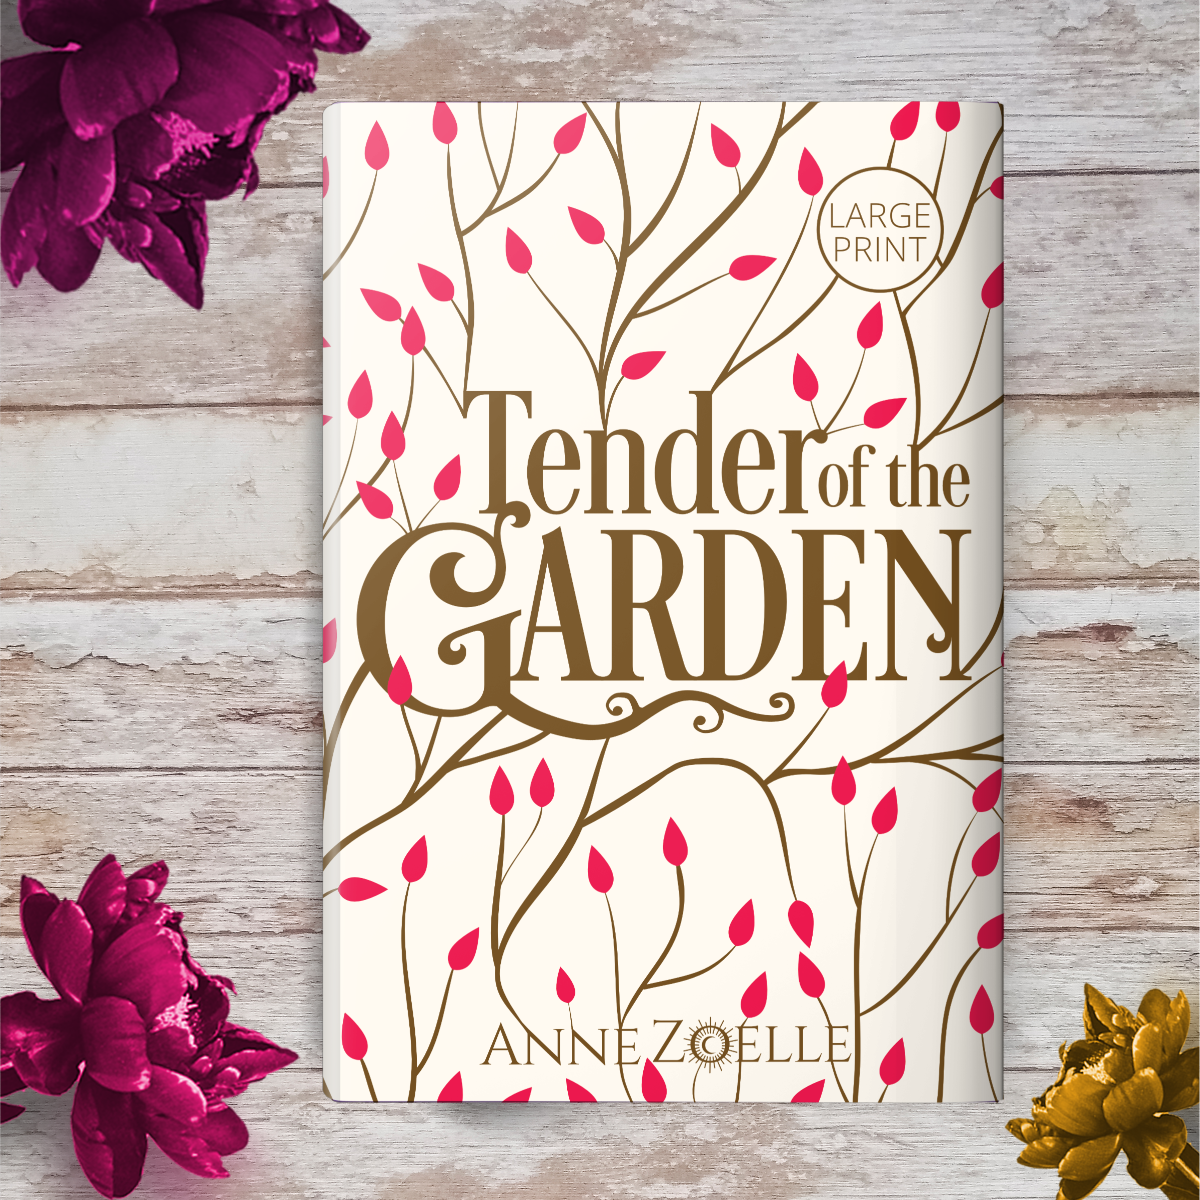 Tender of the Garden image of Large Print Book.